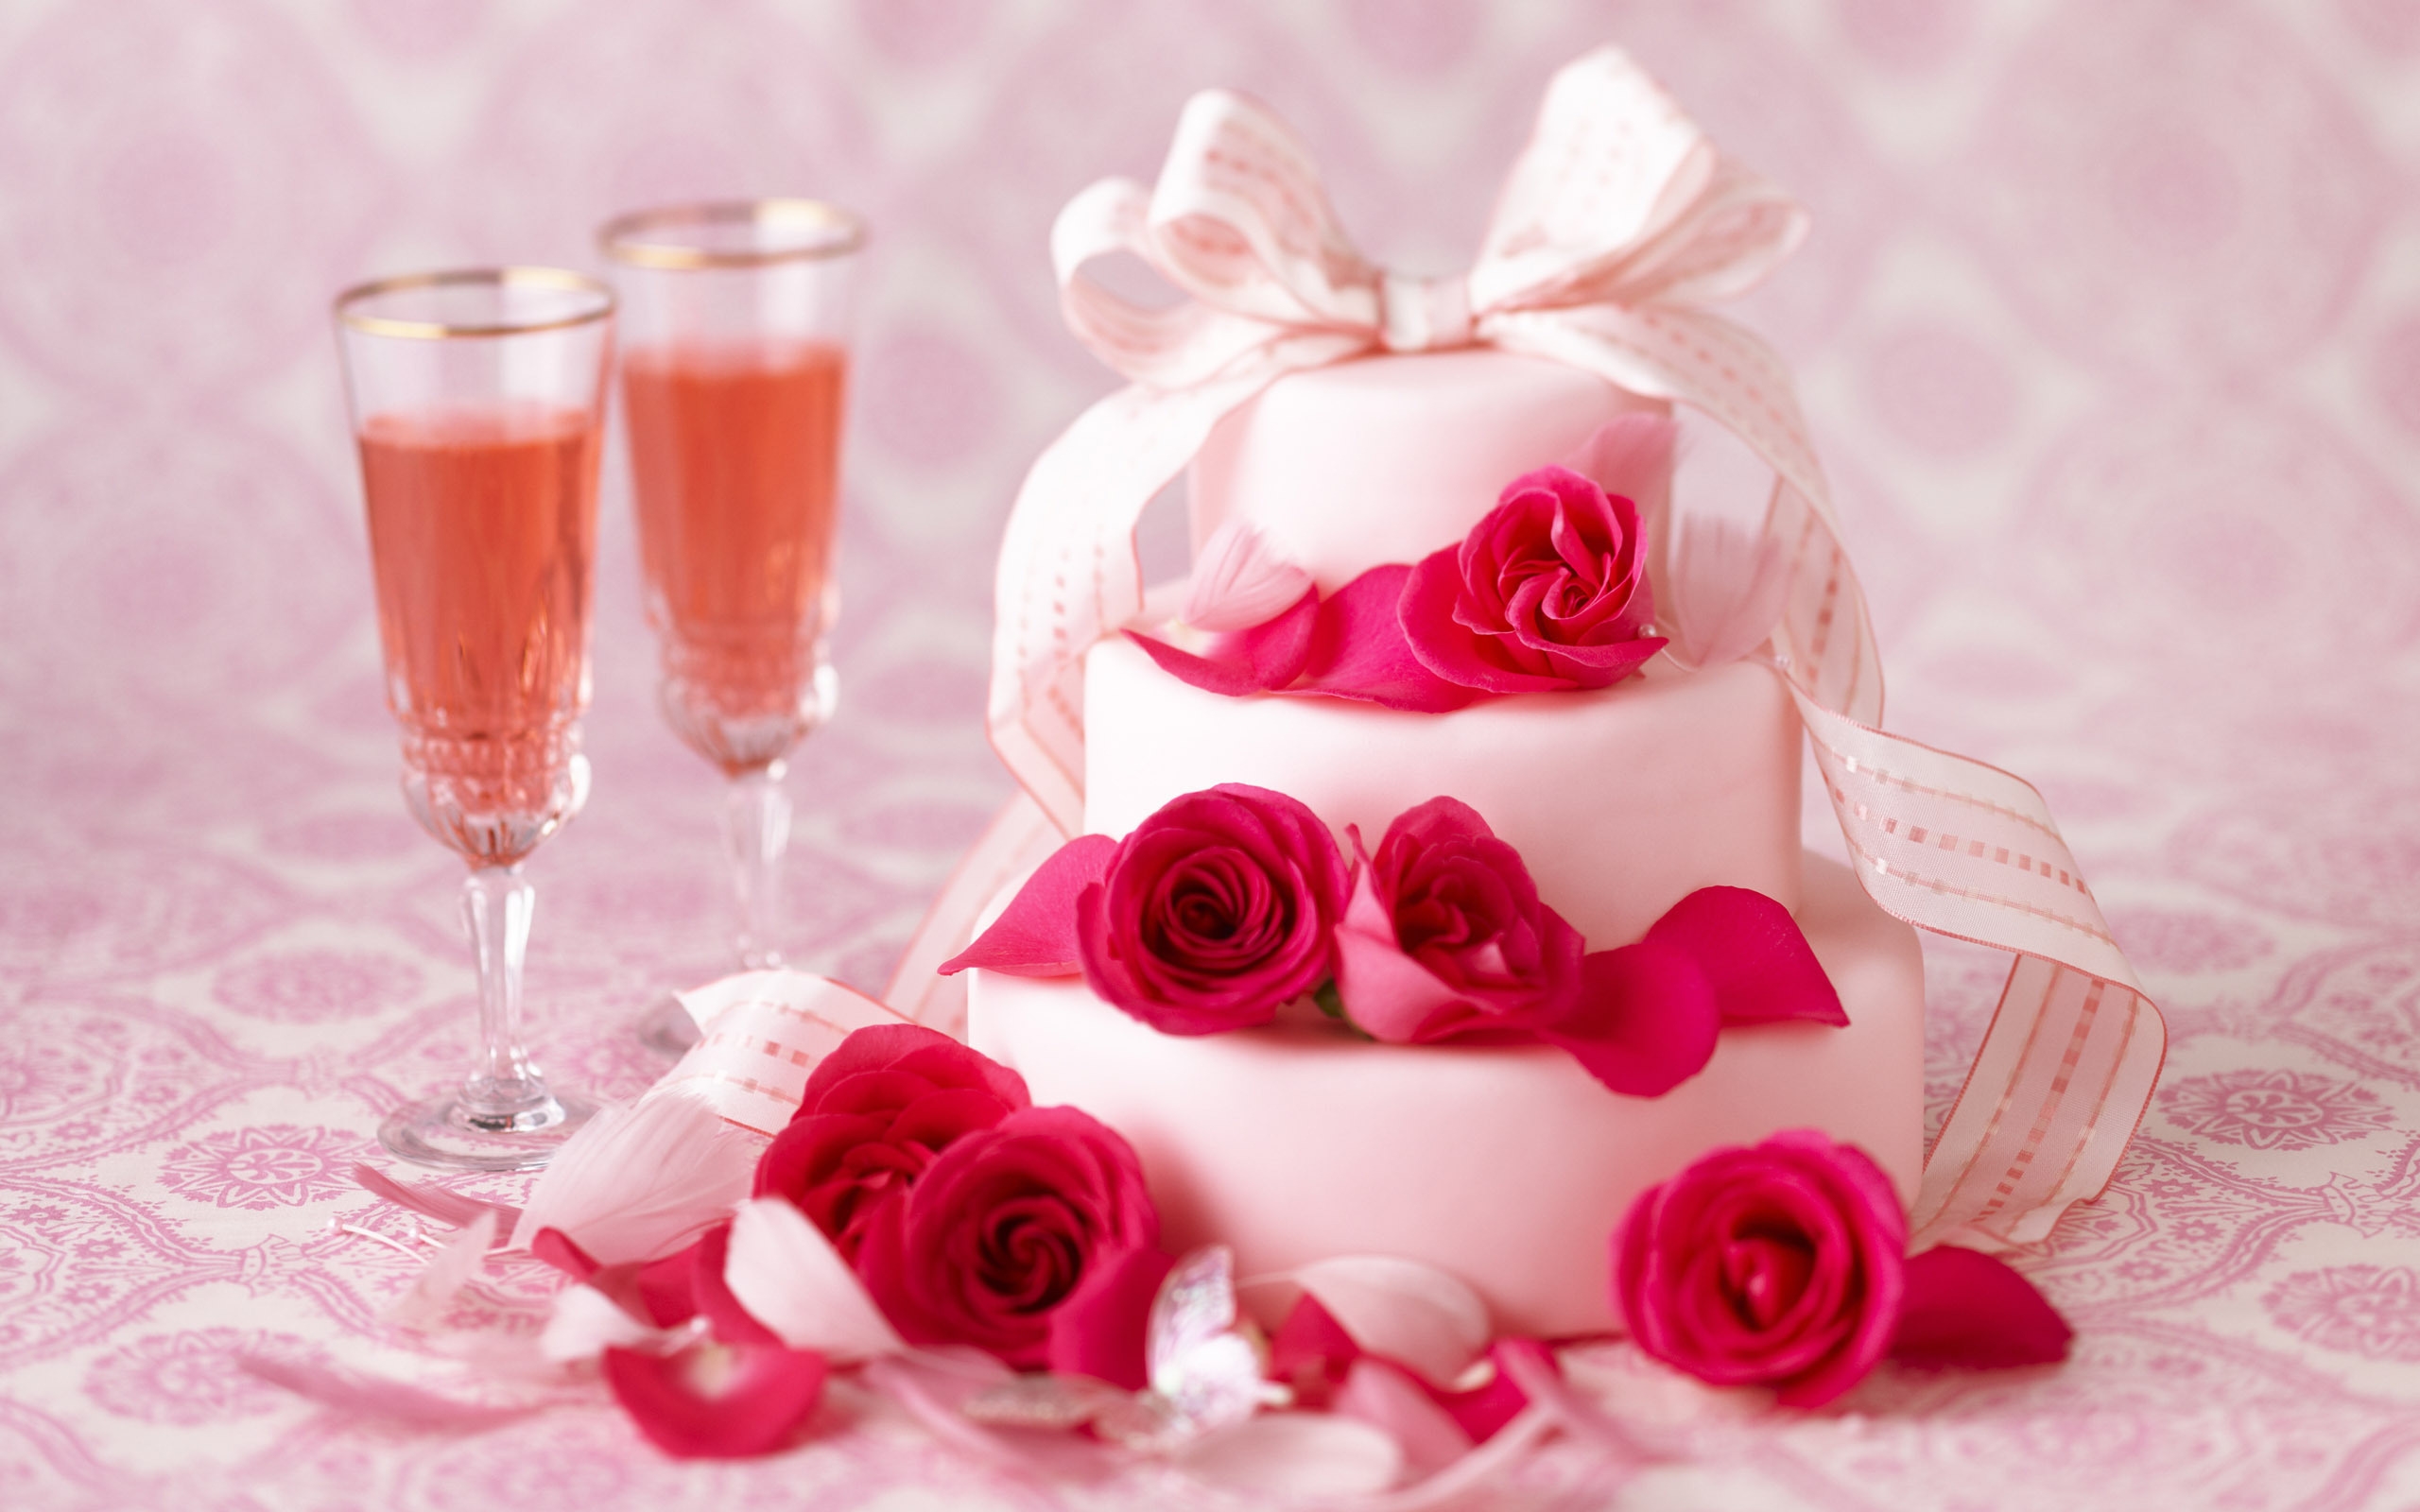 Free photo A cake with roses and champagne